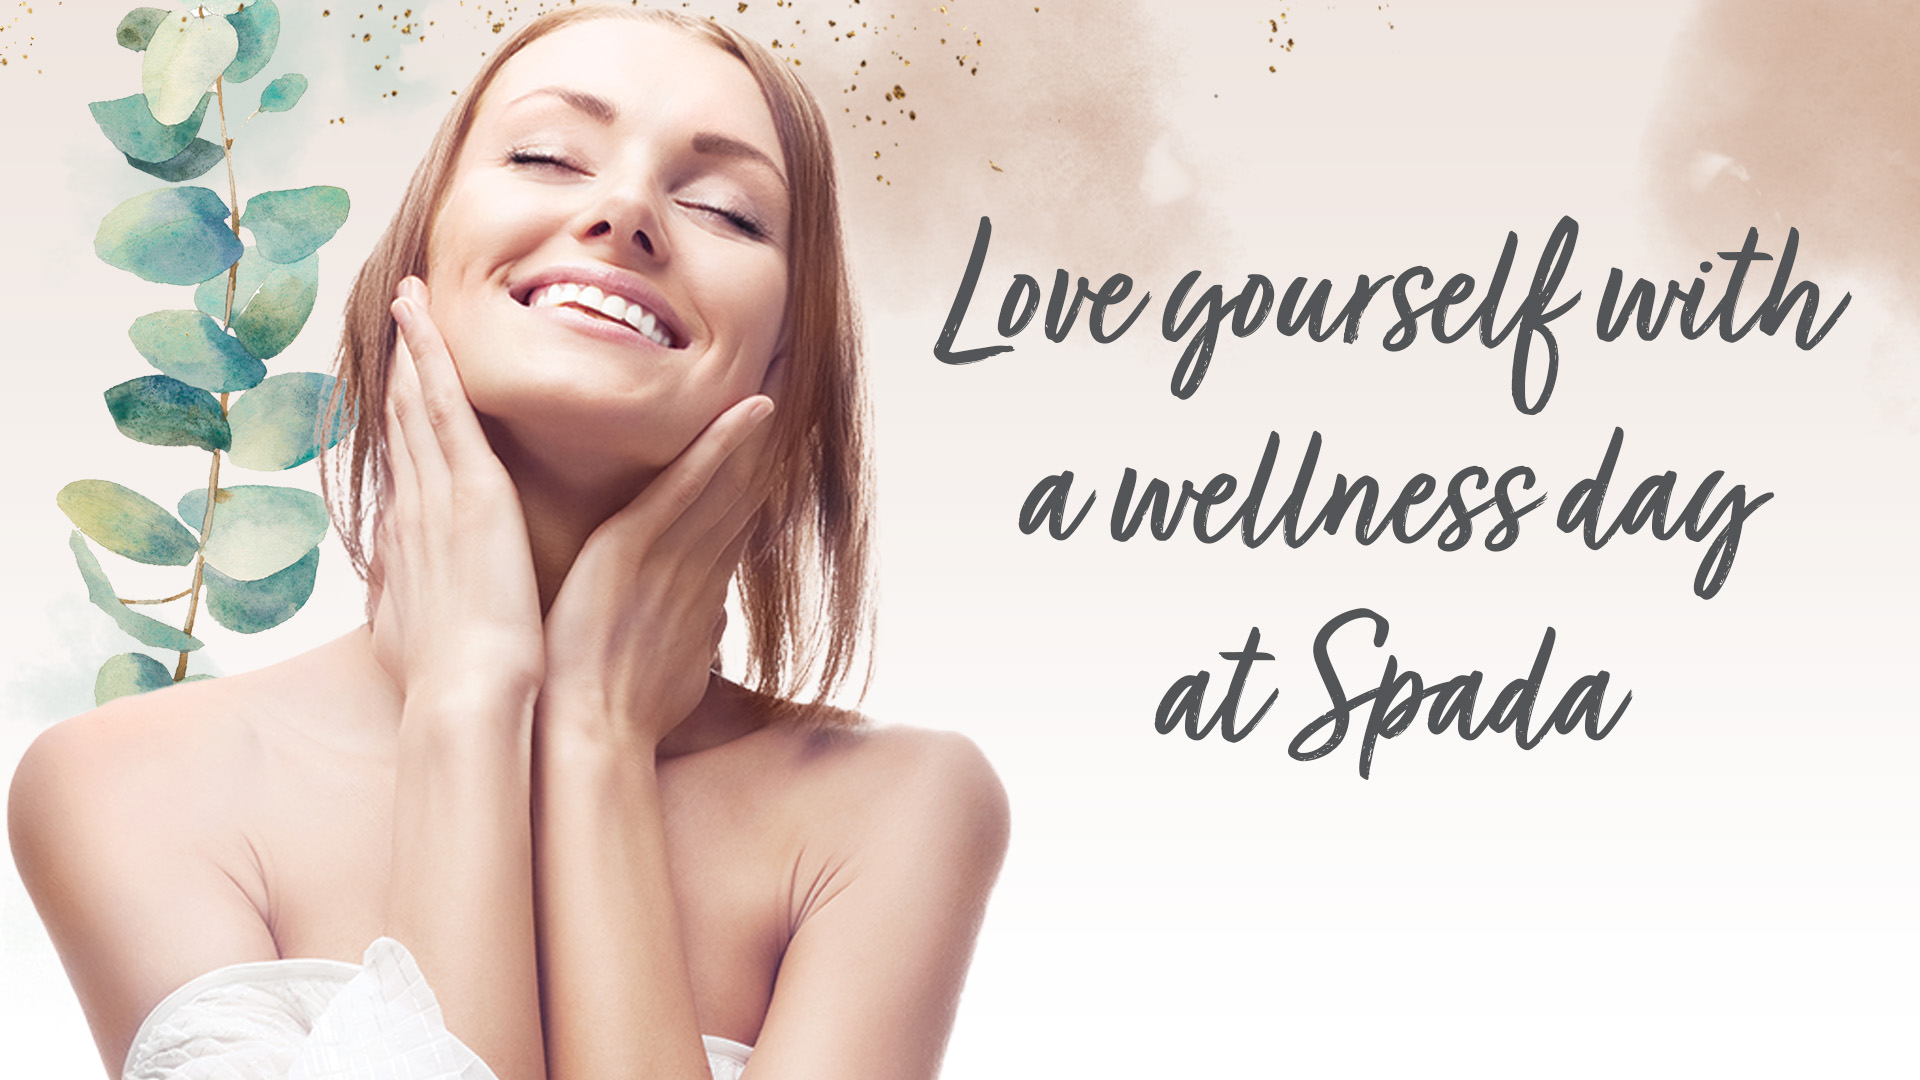 Love yourself with a wellness day at Spada